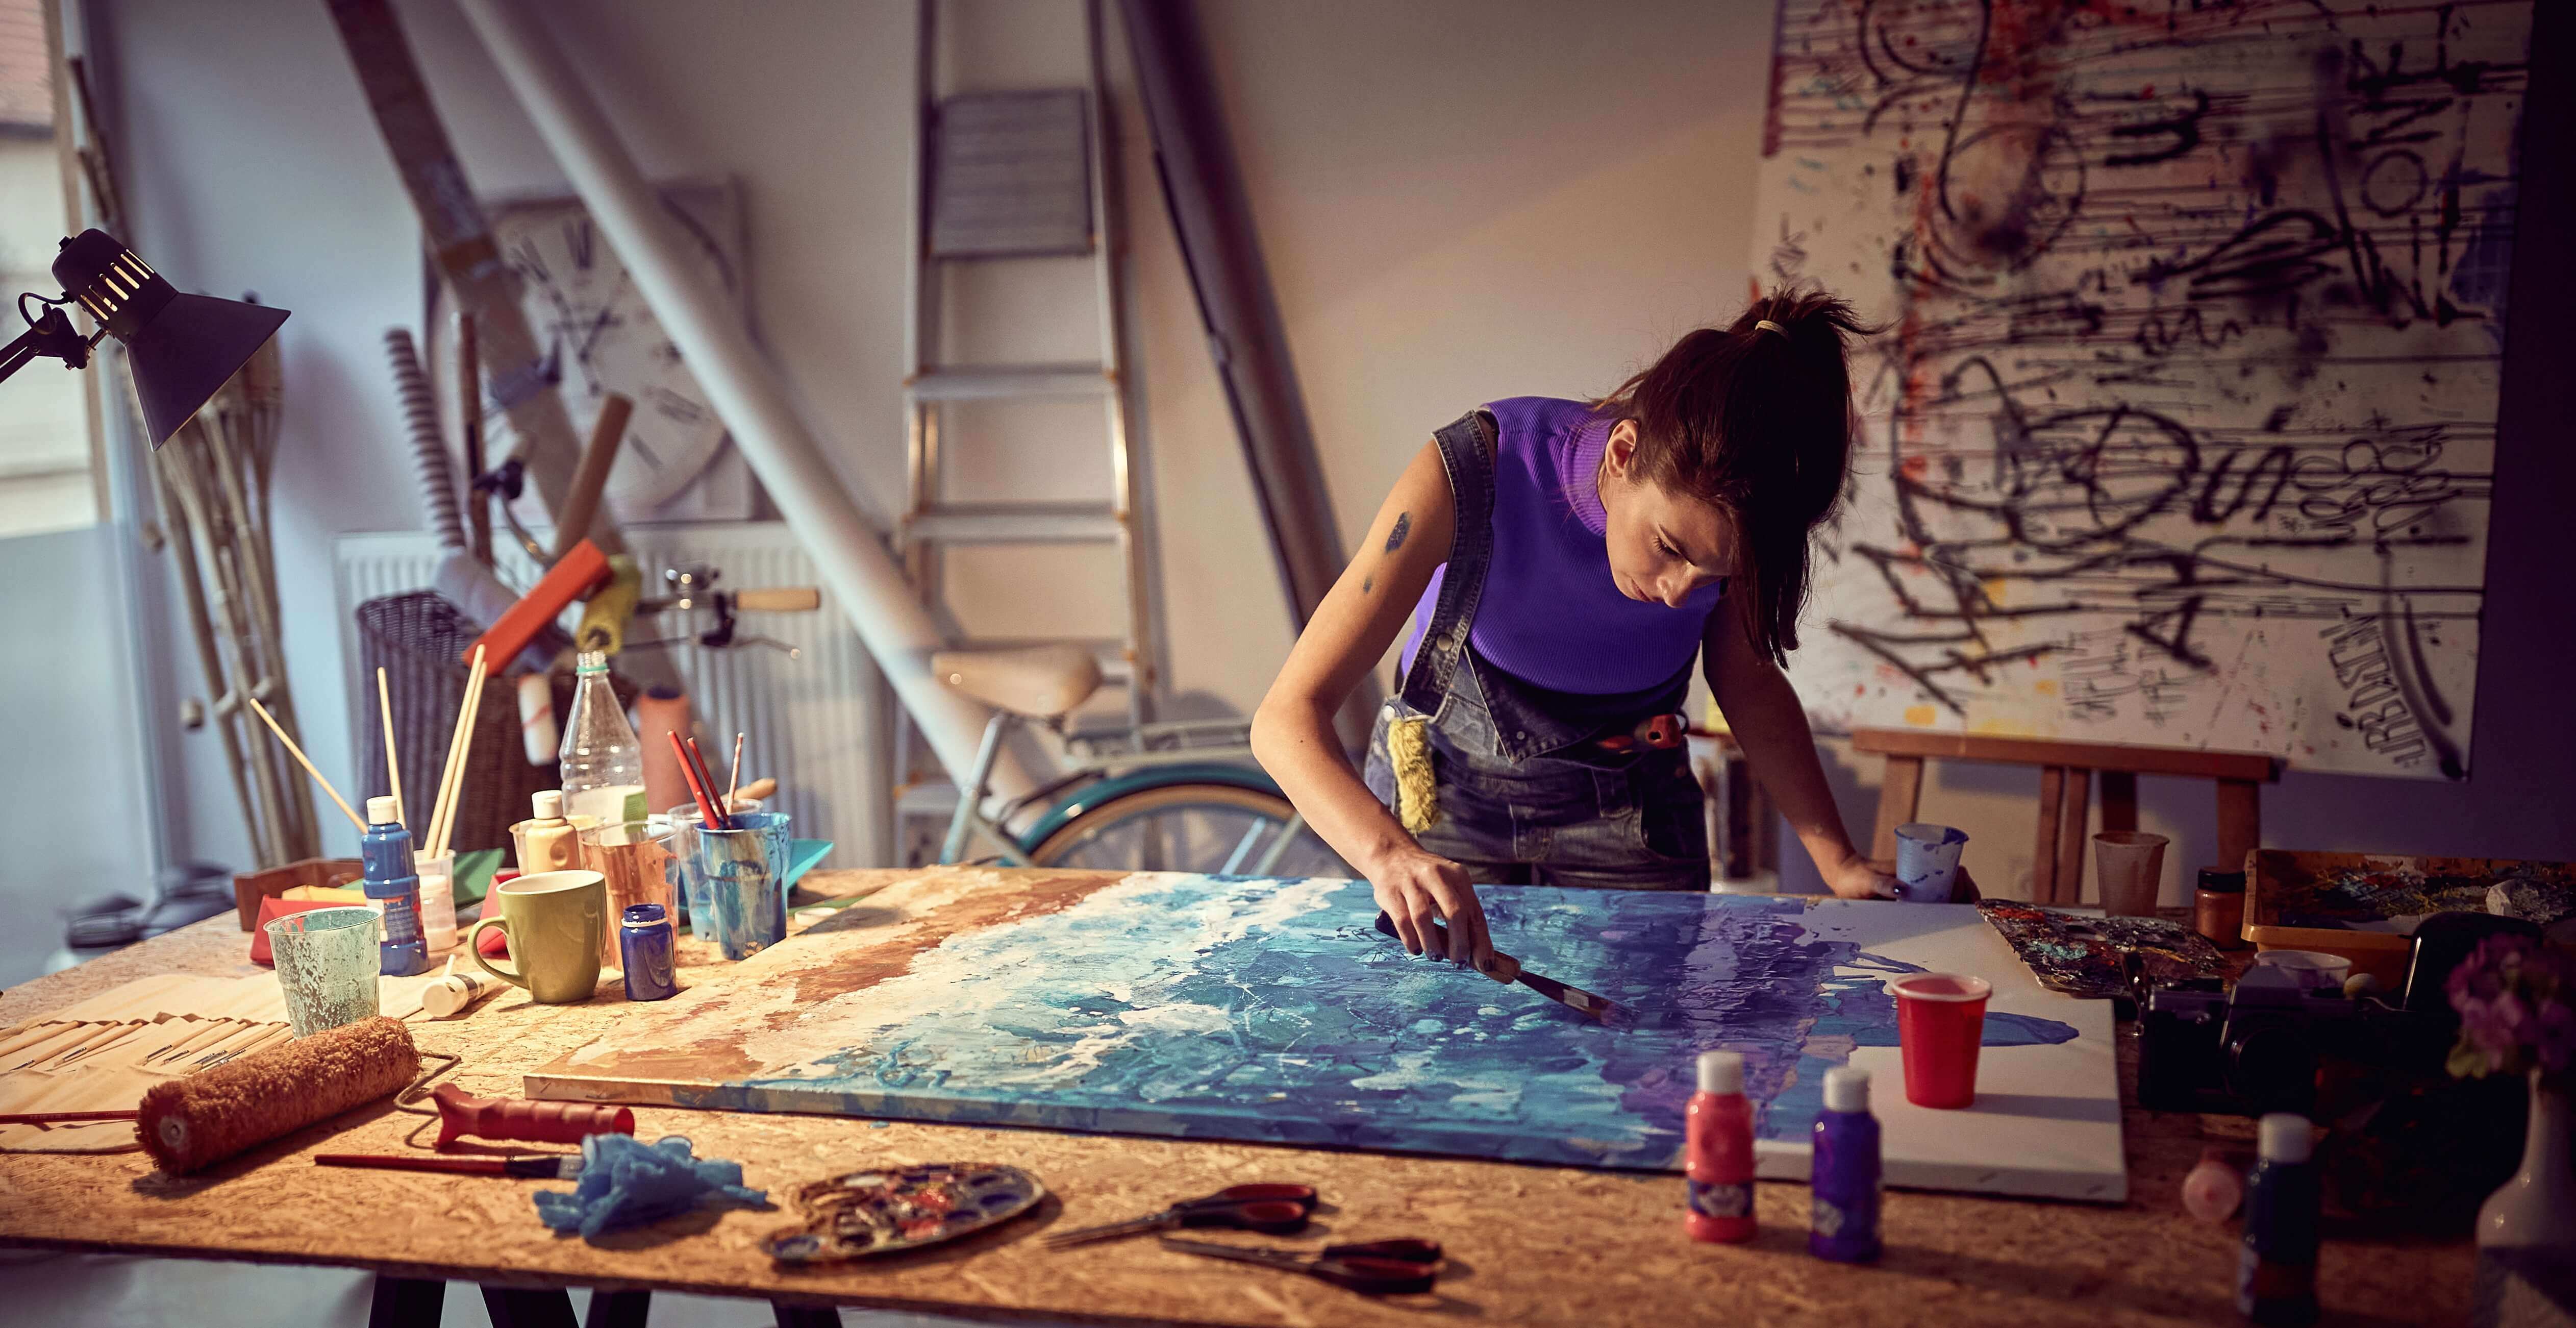 A woman wearing a paint-stained apron bends over a table to paint a large blue canvas in her artist studio.